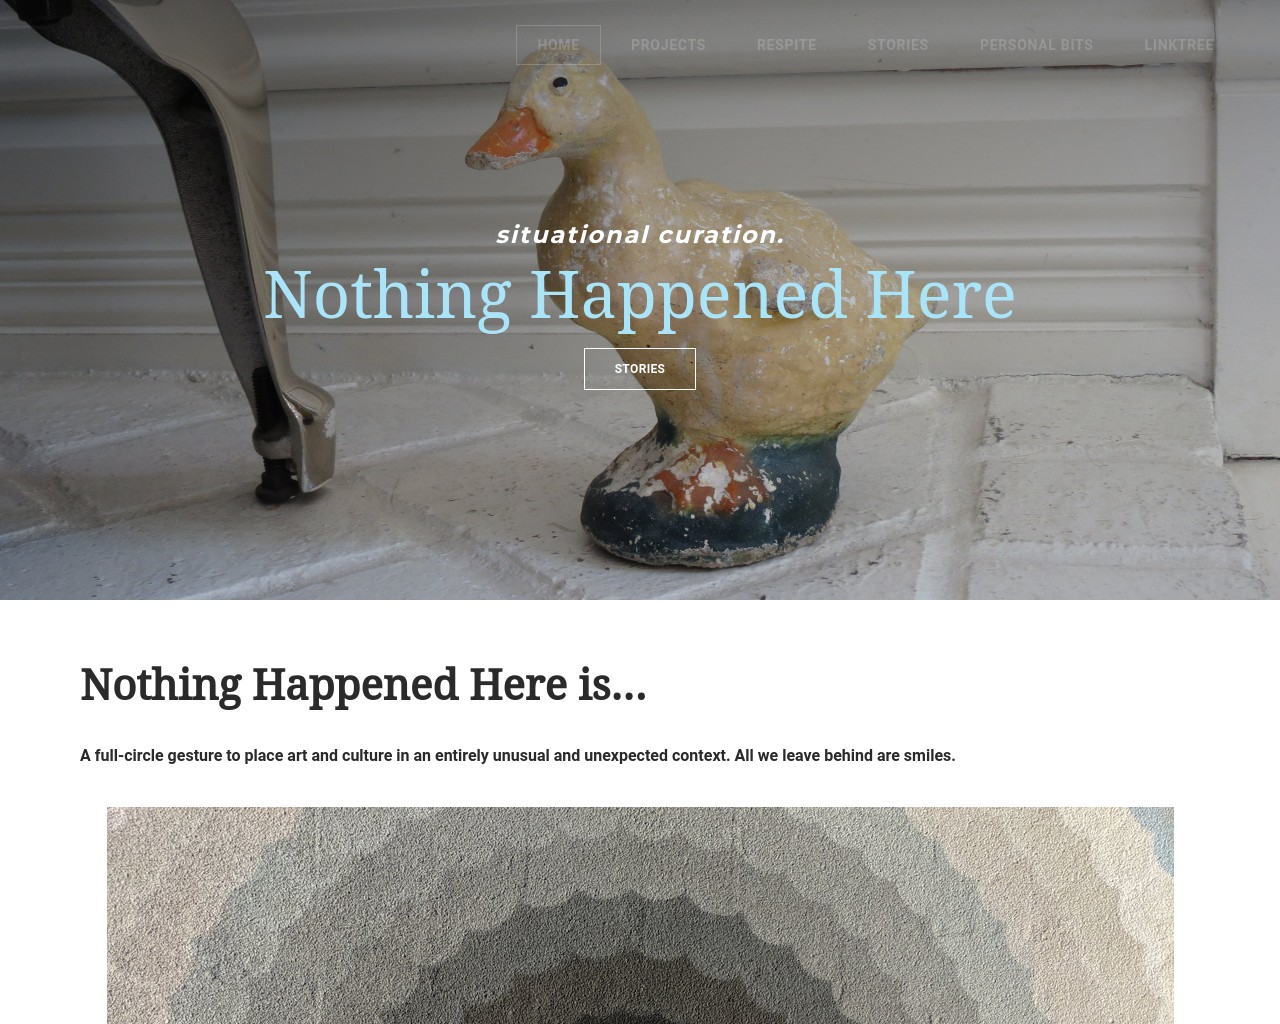 nothinghappenedhere.com